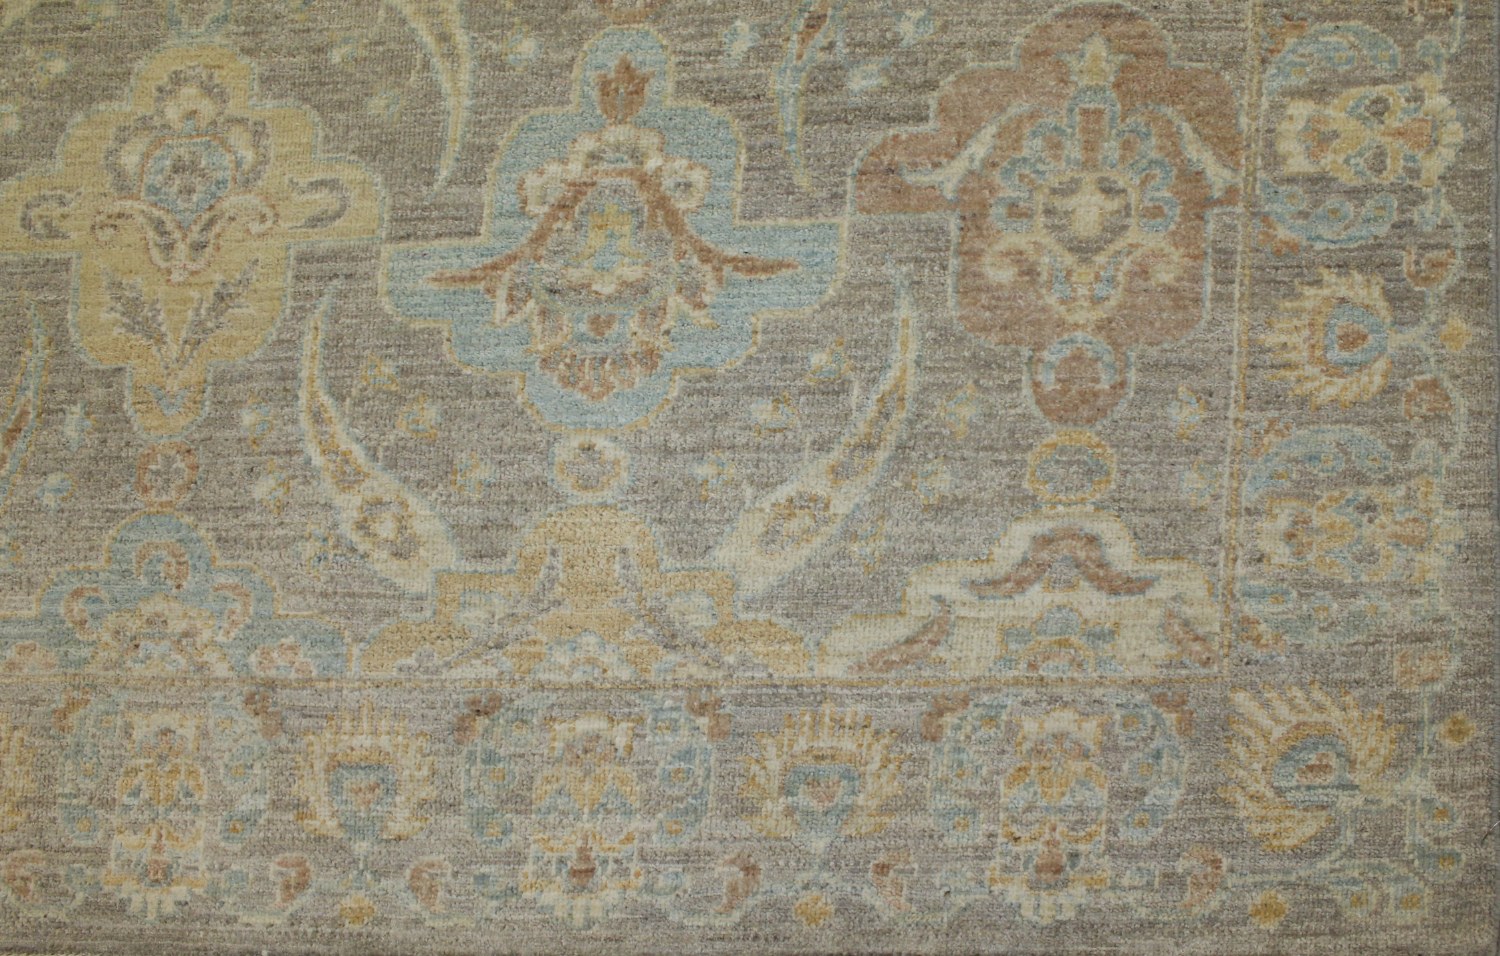 8x10 Peshawar Hand Knotted Wool Area Rug - MR17262